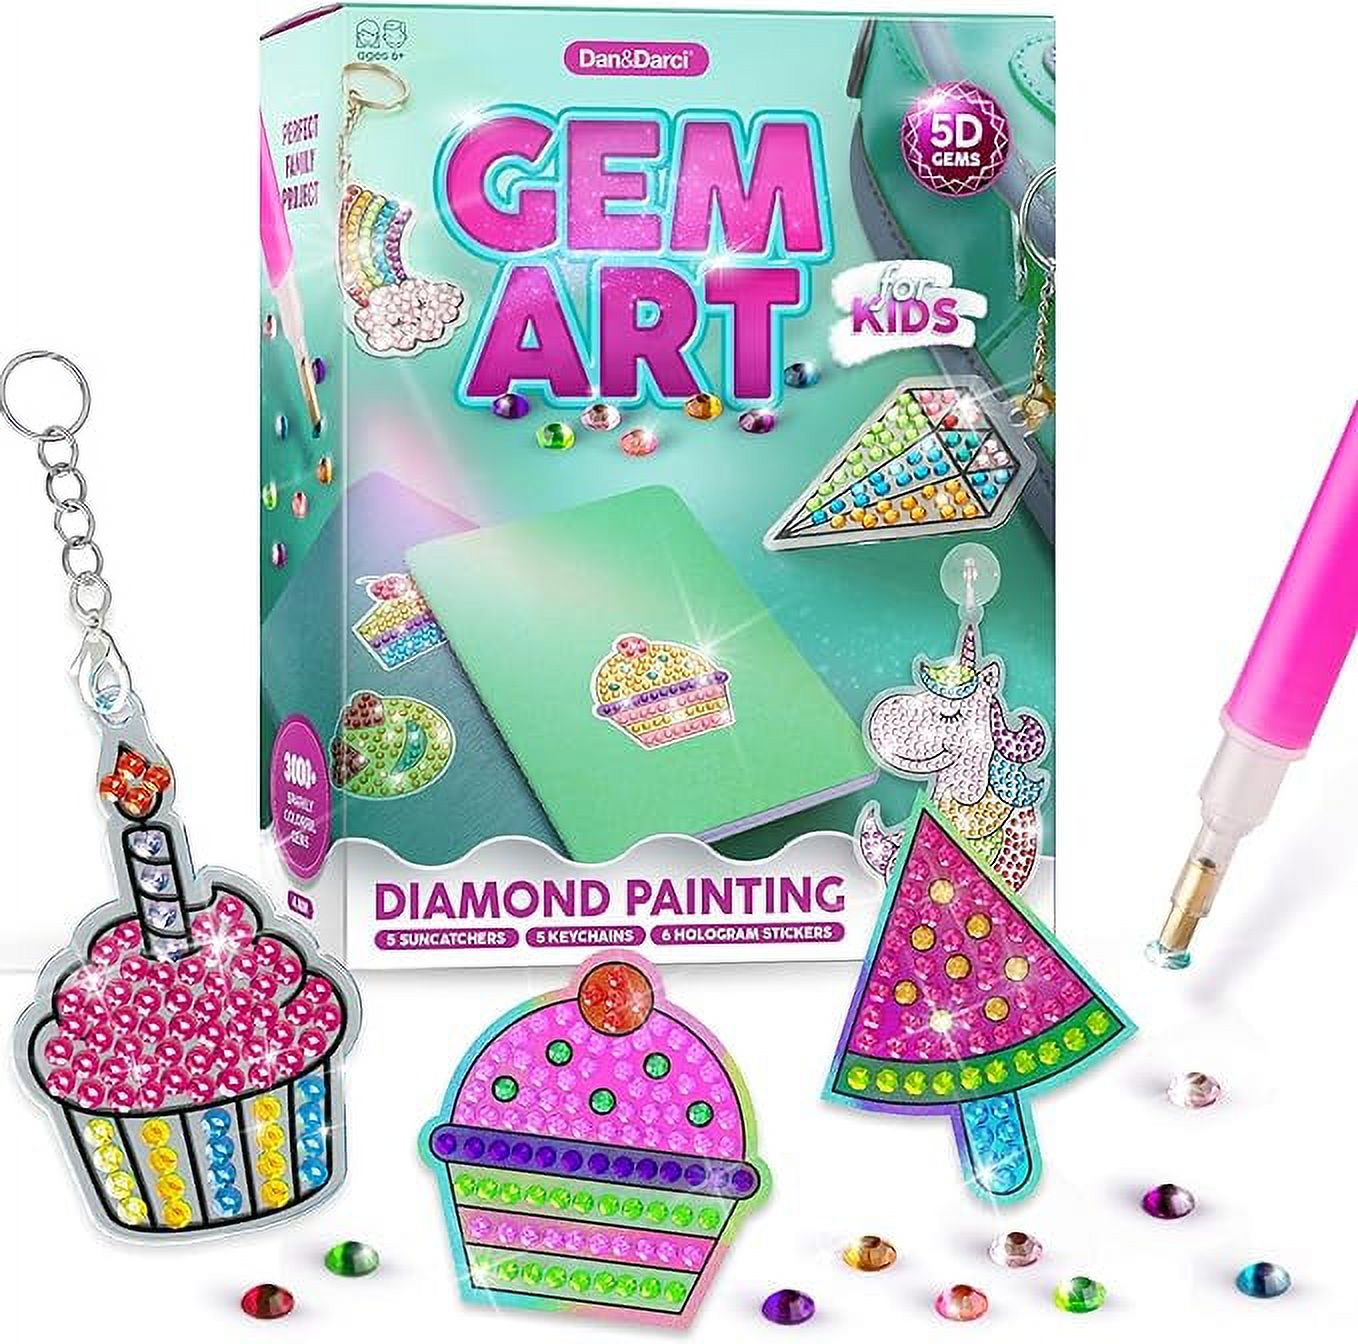 Gem Art, Kids Diamond Painting Kit - Big 5D Gems - Arts and Crafts for Girls and Boys Ages 6-12 - Gem Painting Kits - Best Tween Gift Ideas for Age 4